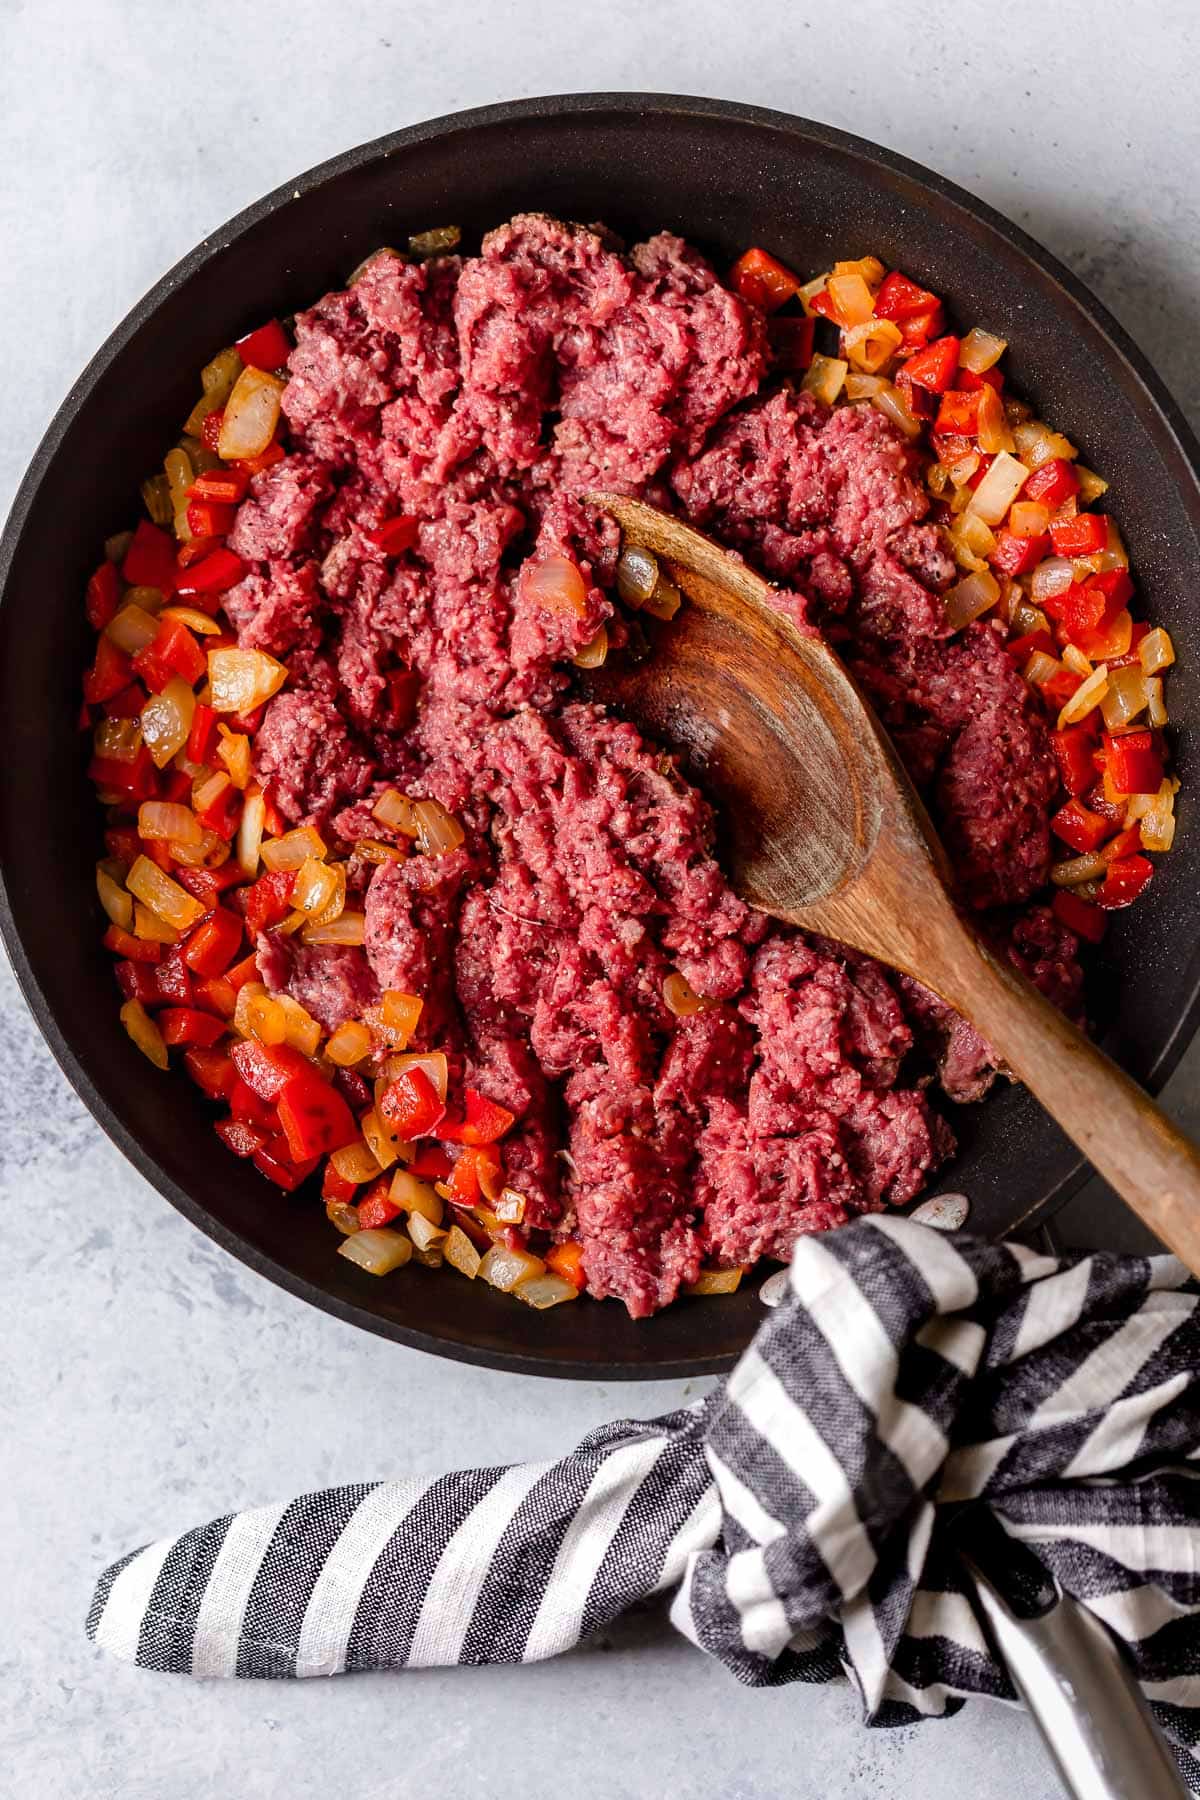 Browning ground beef in a skillet with bell peppers and onions.